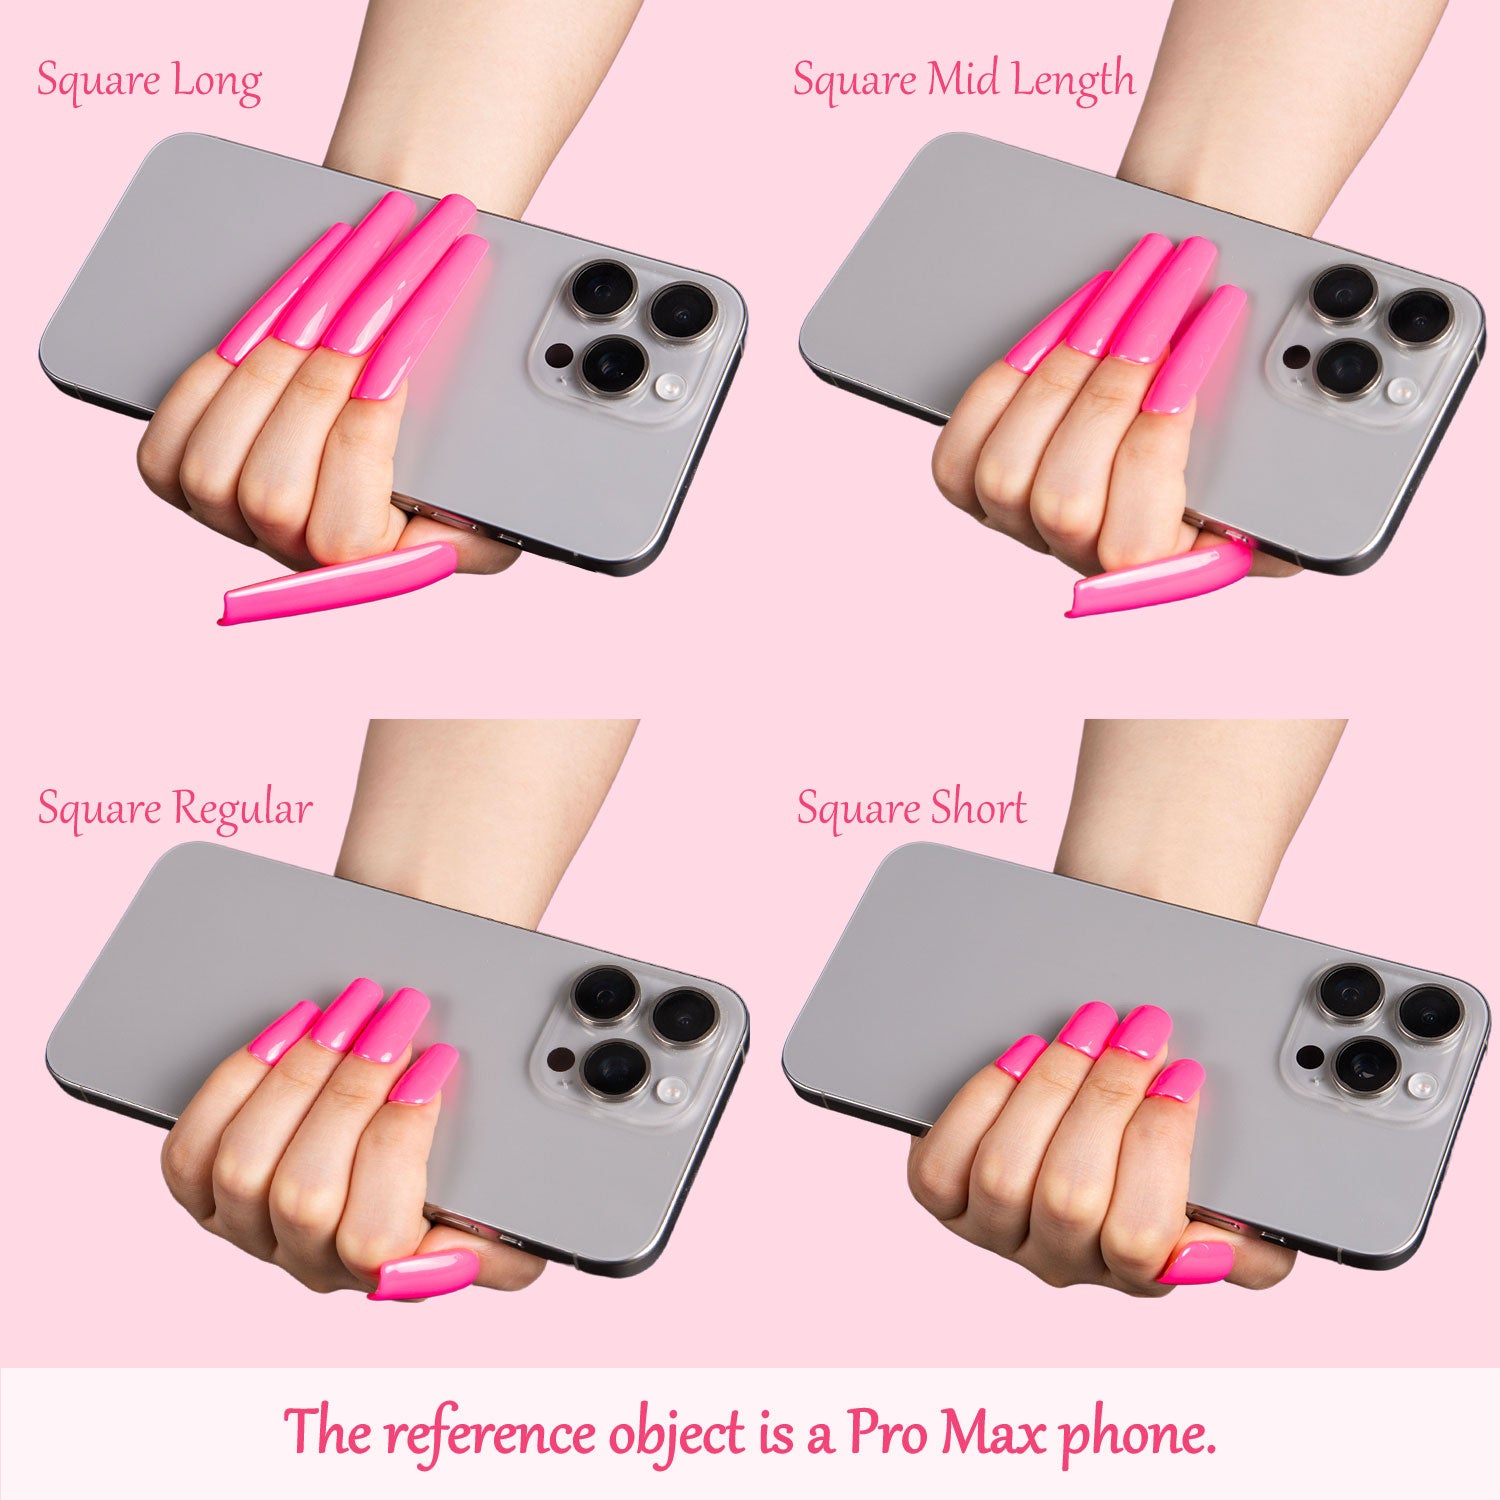 Comparison of pink press-on acrylic nails in four different lengths (Square Long, Square Mid Length, Square Regular, Square Short) using a Pro Max phone as a reference object.